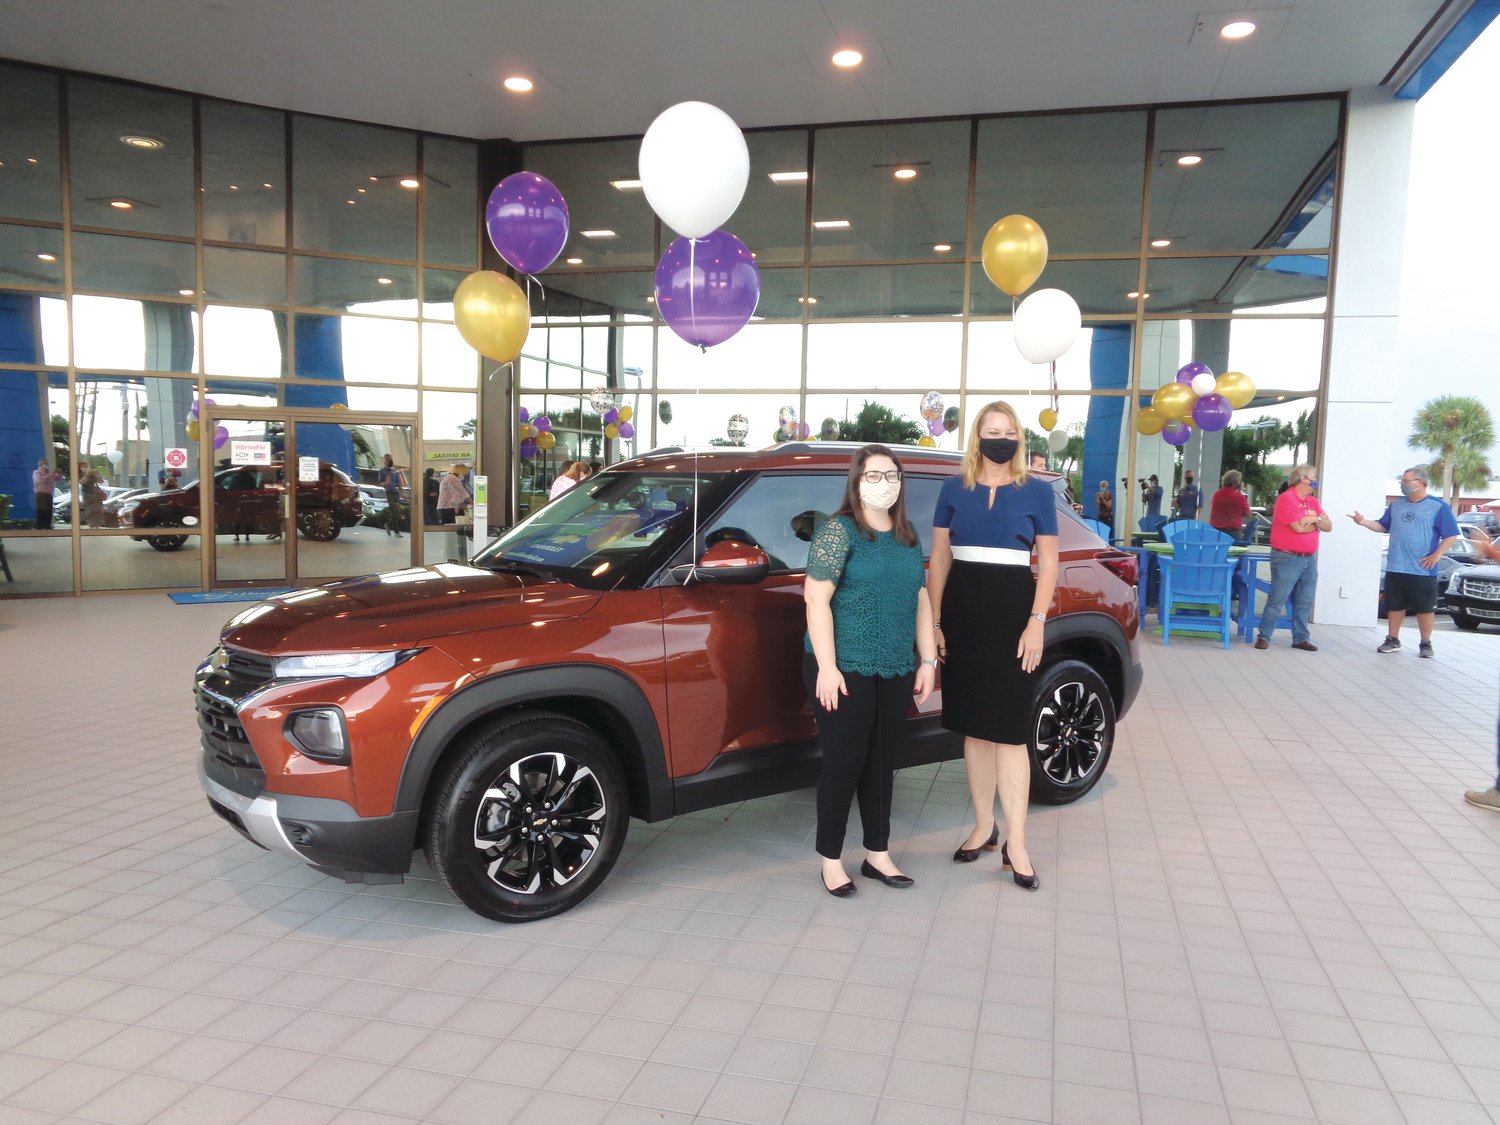 OKEECHOBEE — On Oct. 16, Florida Teacher of the Year Krista Stanley (left) was presented with a free two-year lease on a 2021 Chevrolet Trailblazer by Christa Luna of Gilbert Chevrolet.